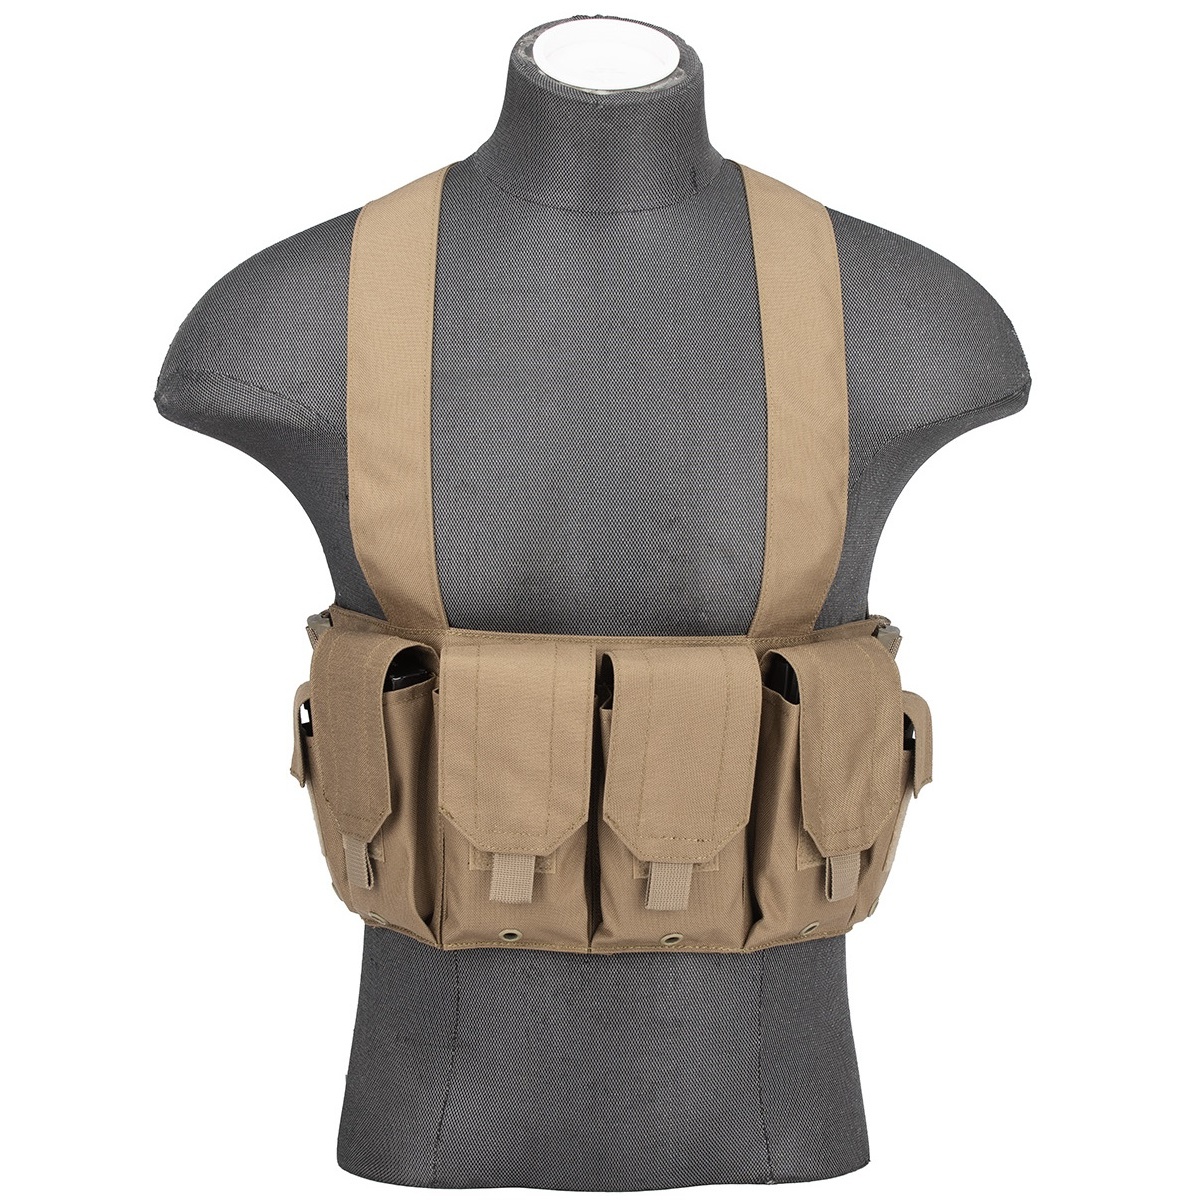 AMA Rugged Tactical Chest Rig w/ 6X Magazine Pouches [1000D] - TAN ...